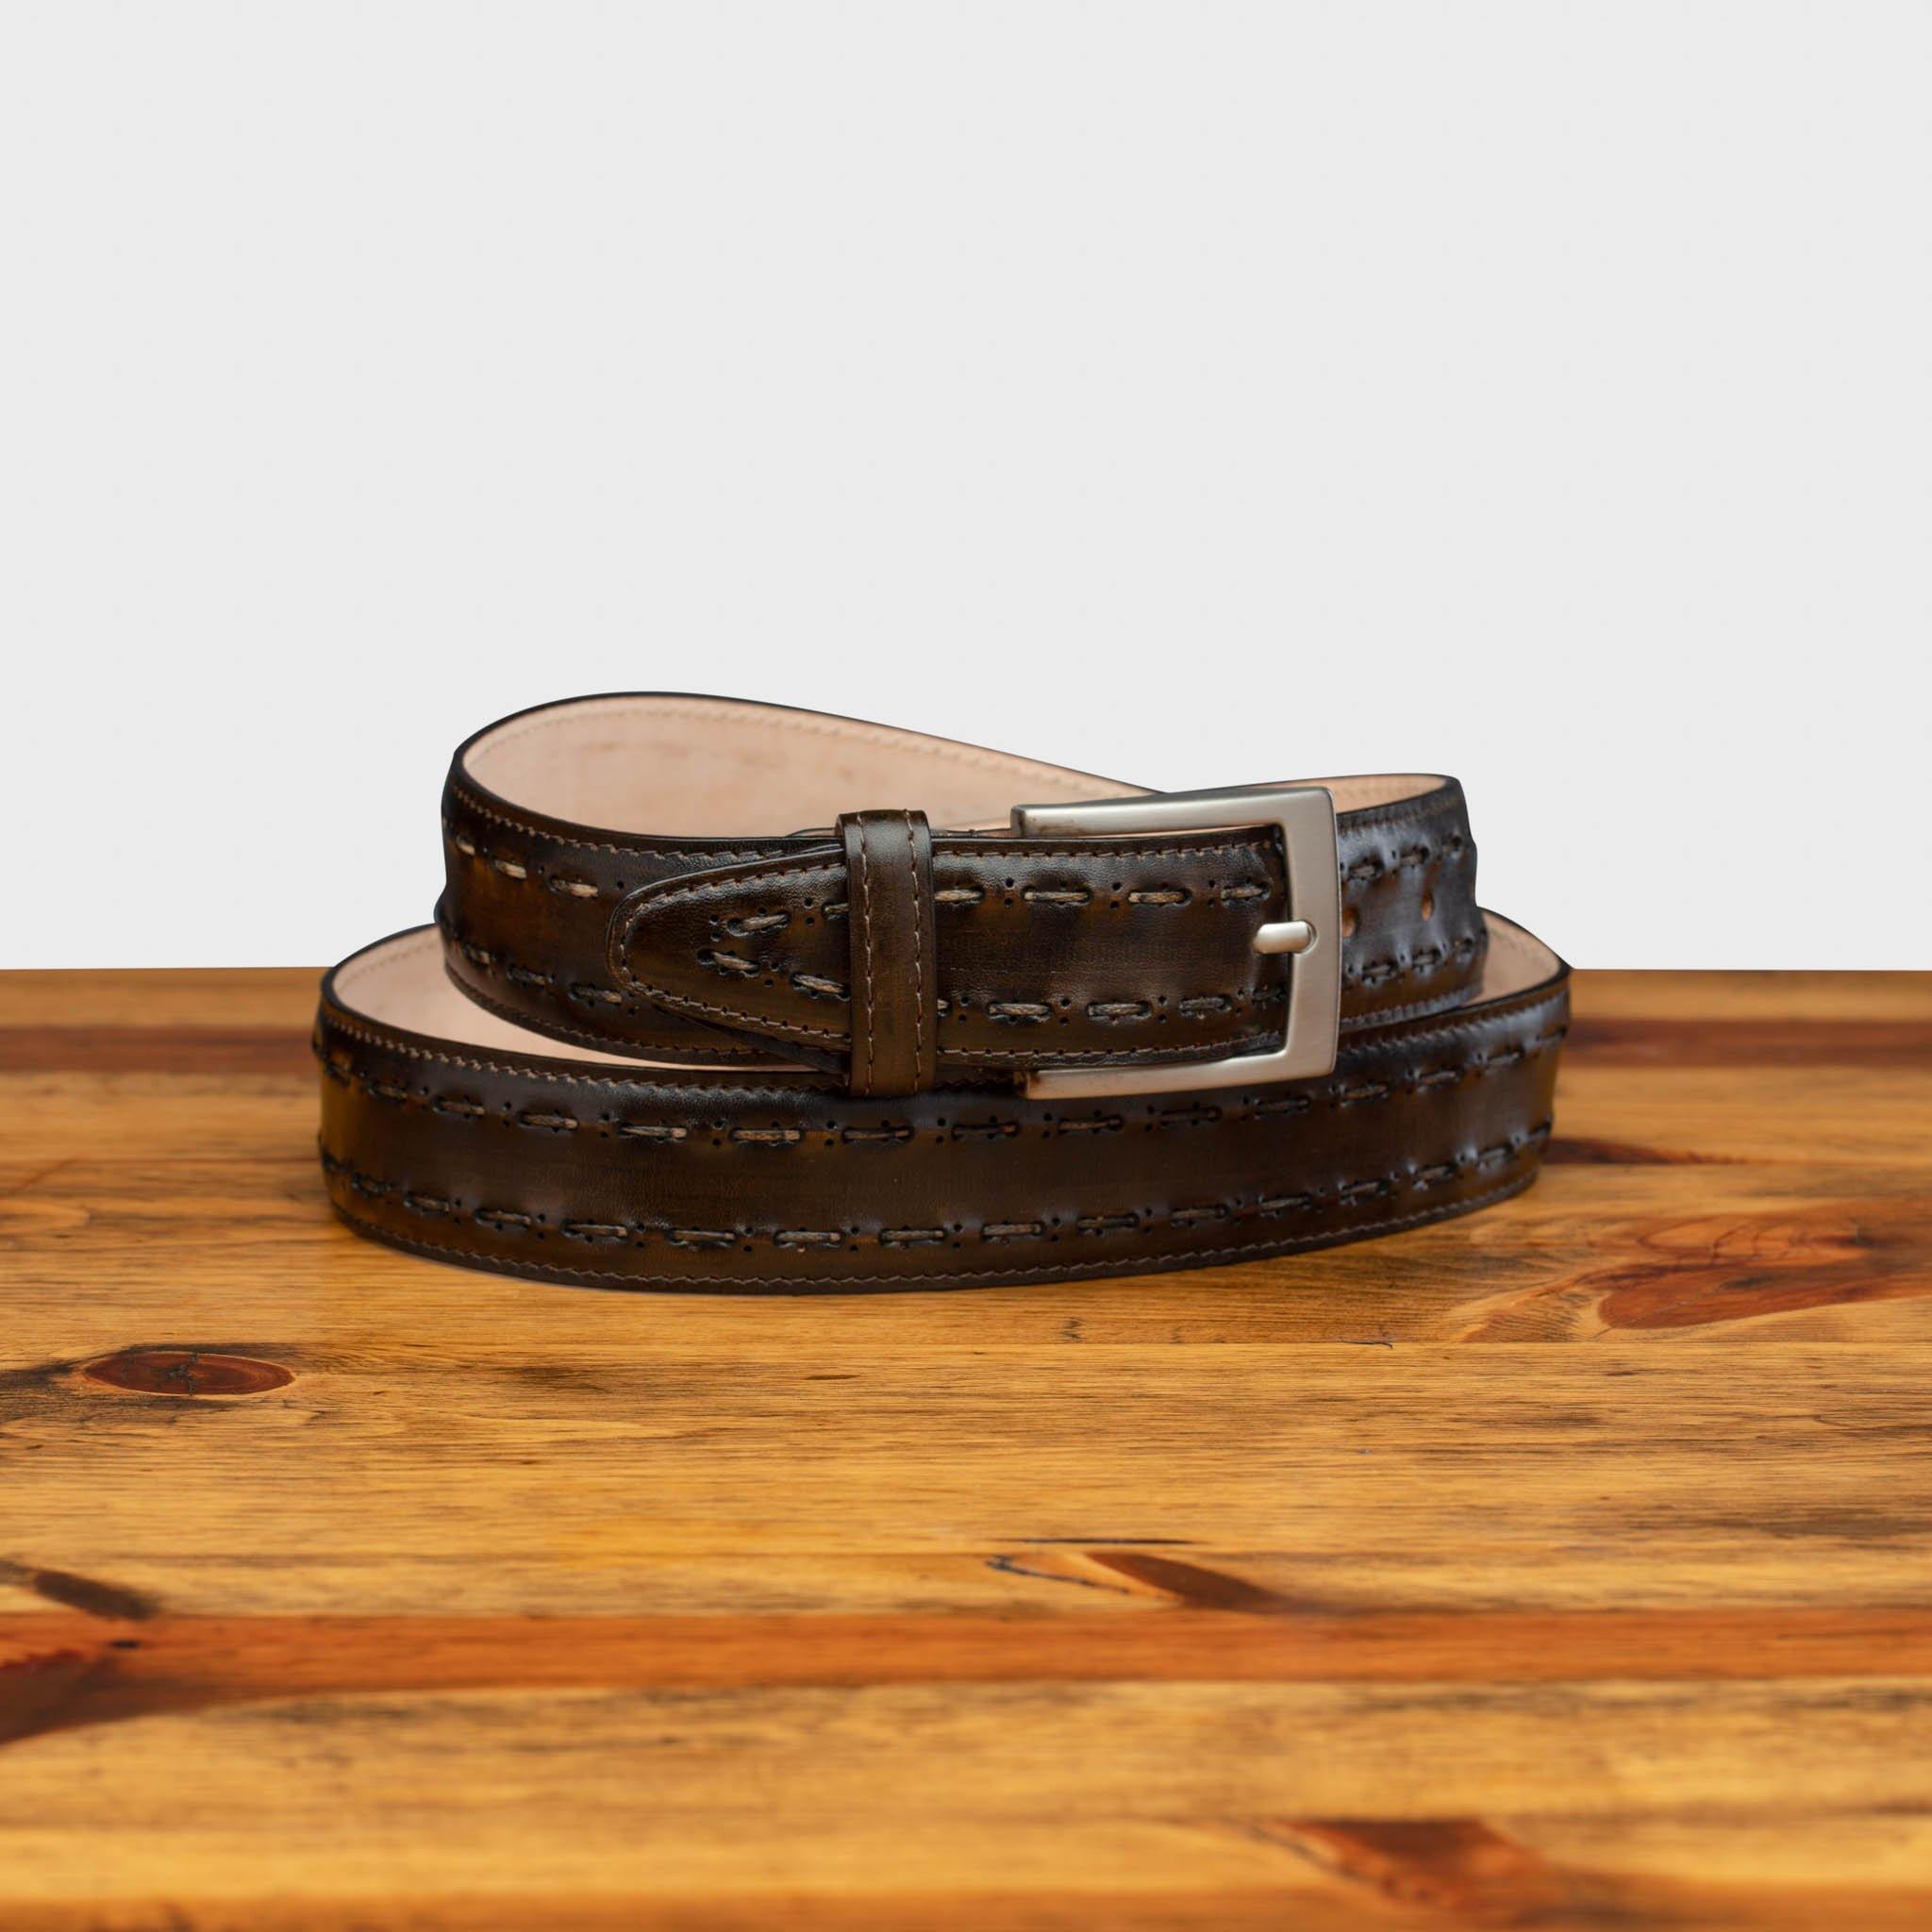 Full profile of C1482 Calzoleria Toscana Dark Brown Stitched Dress Belt curled up on top of a wooden table